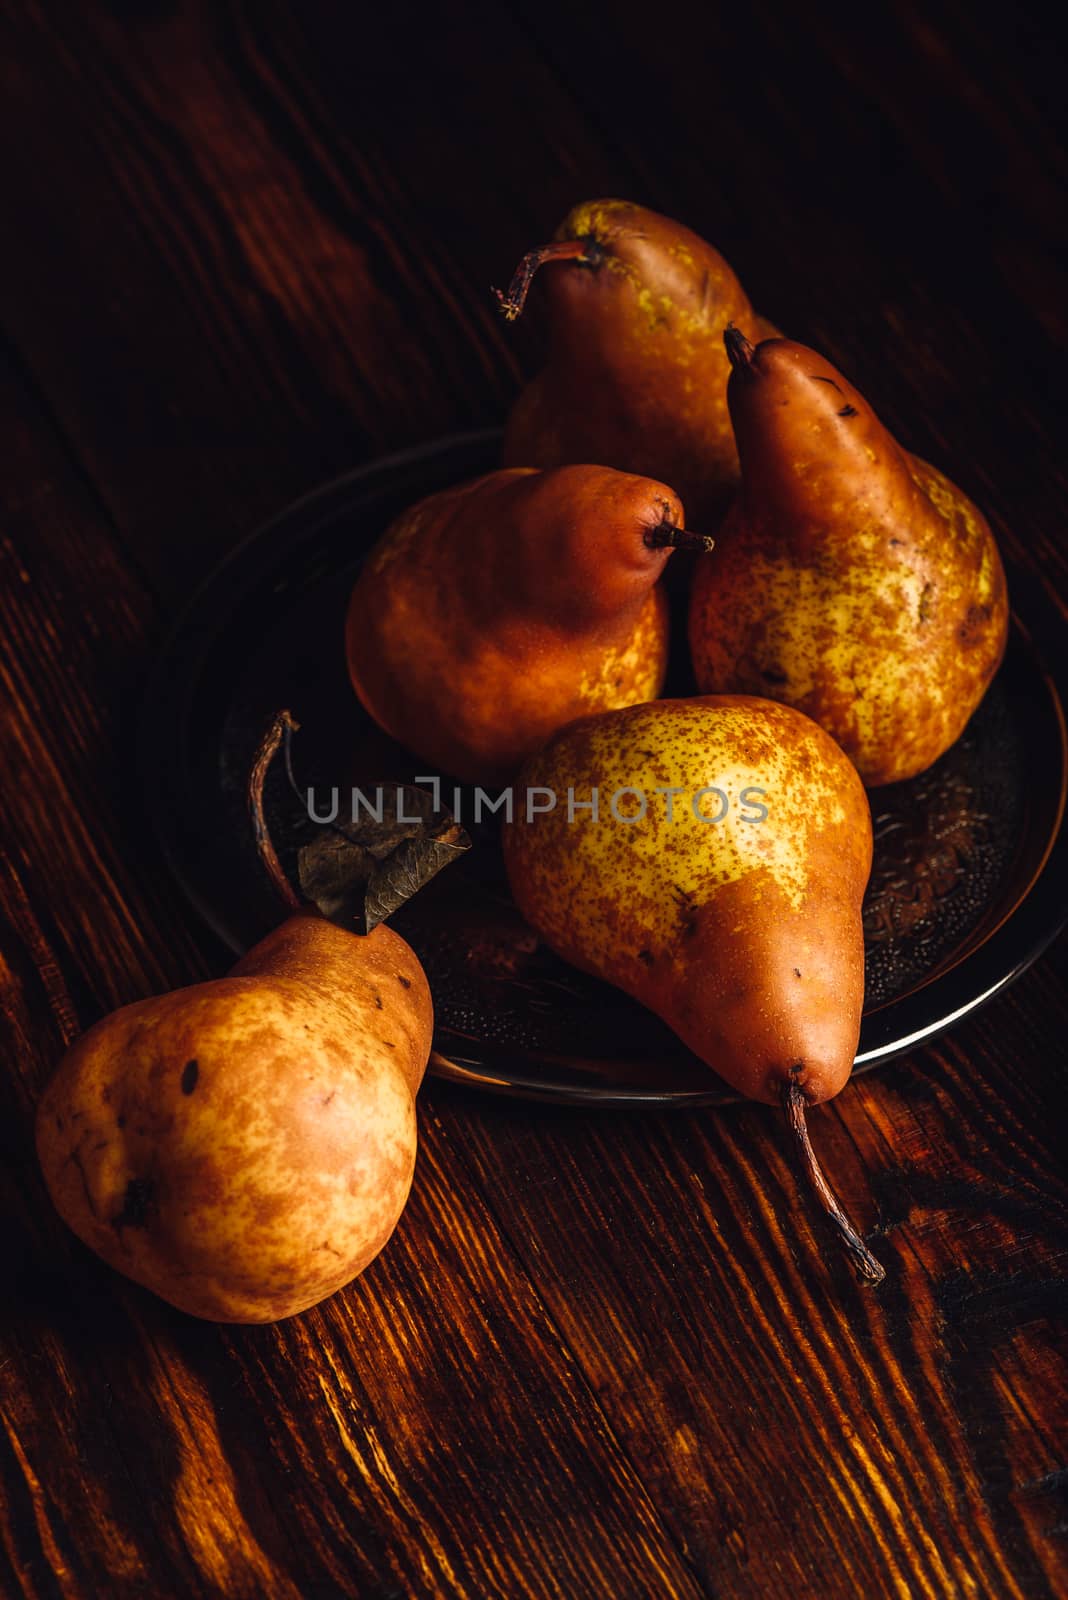 Few Golden Pears with Fork and Knife on Wooden Table. Vertical Orientation.